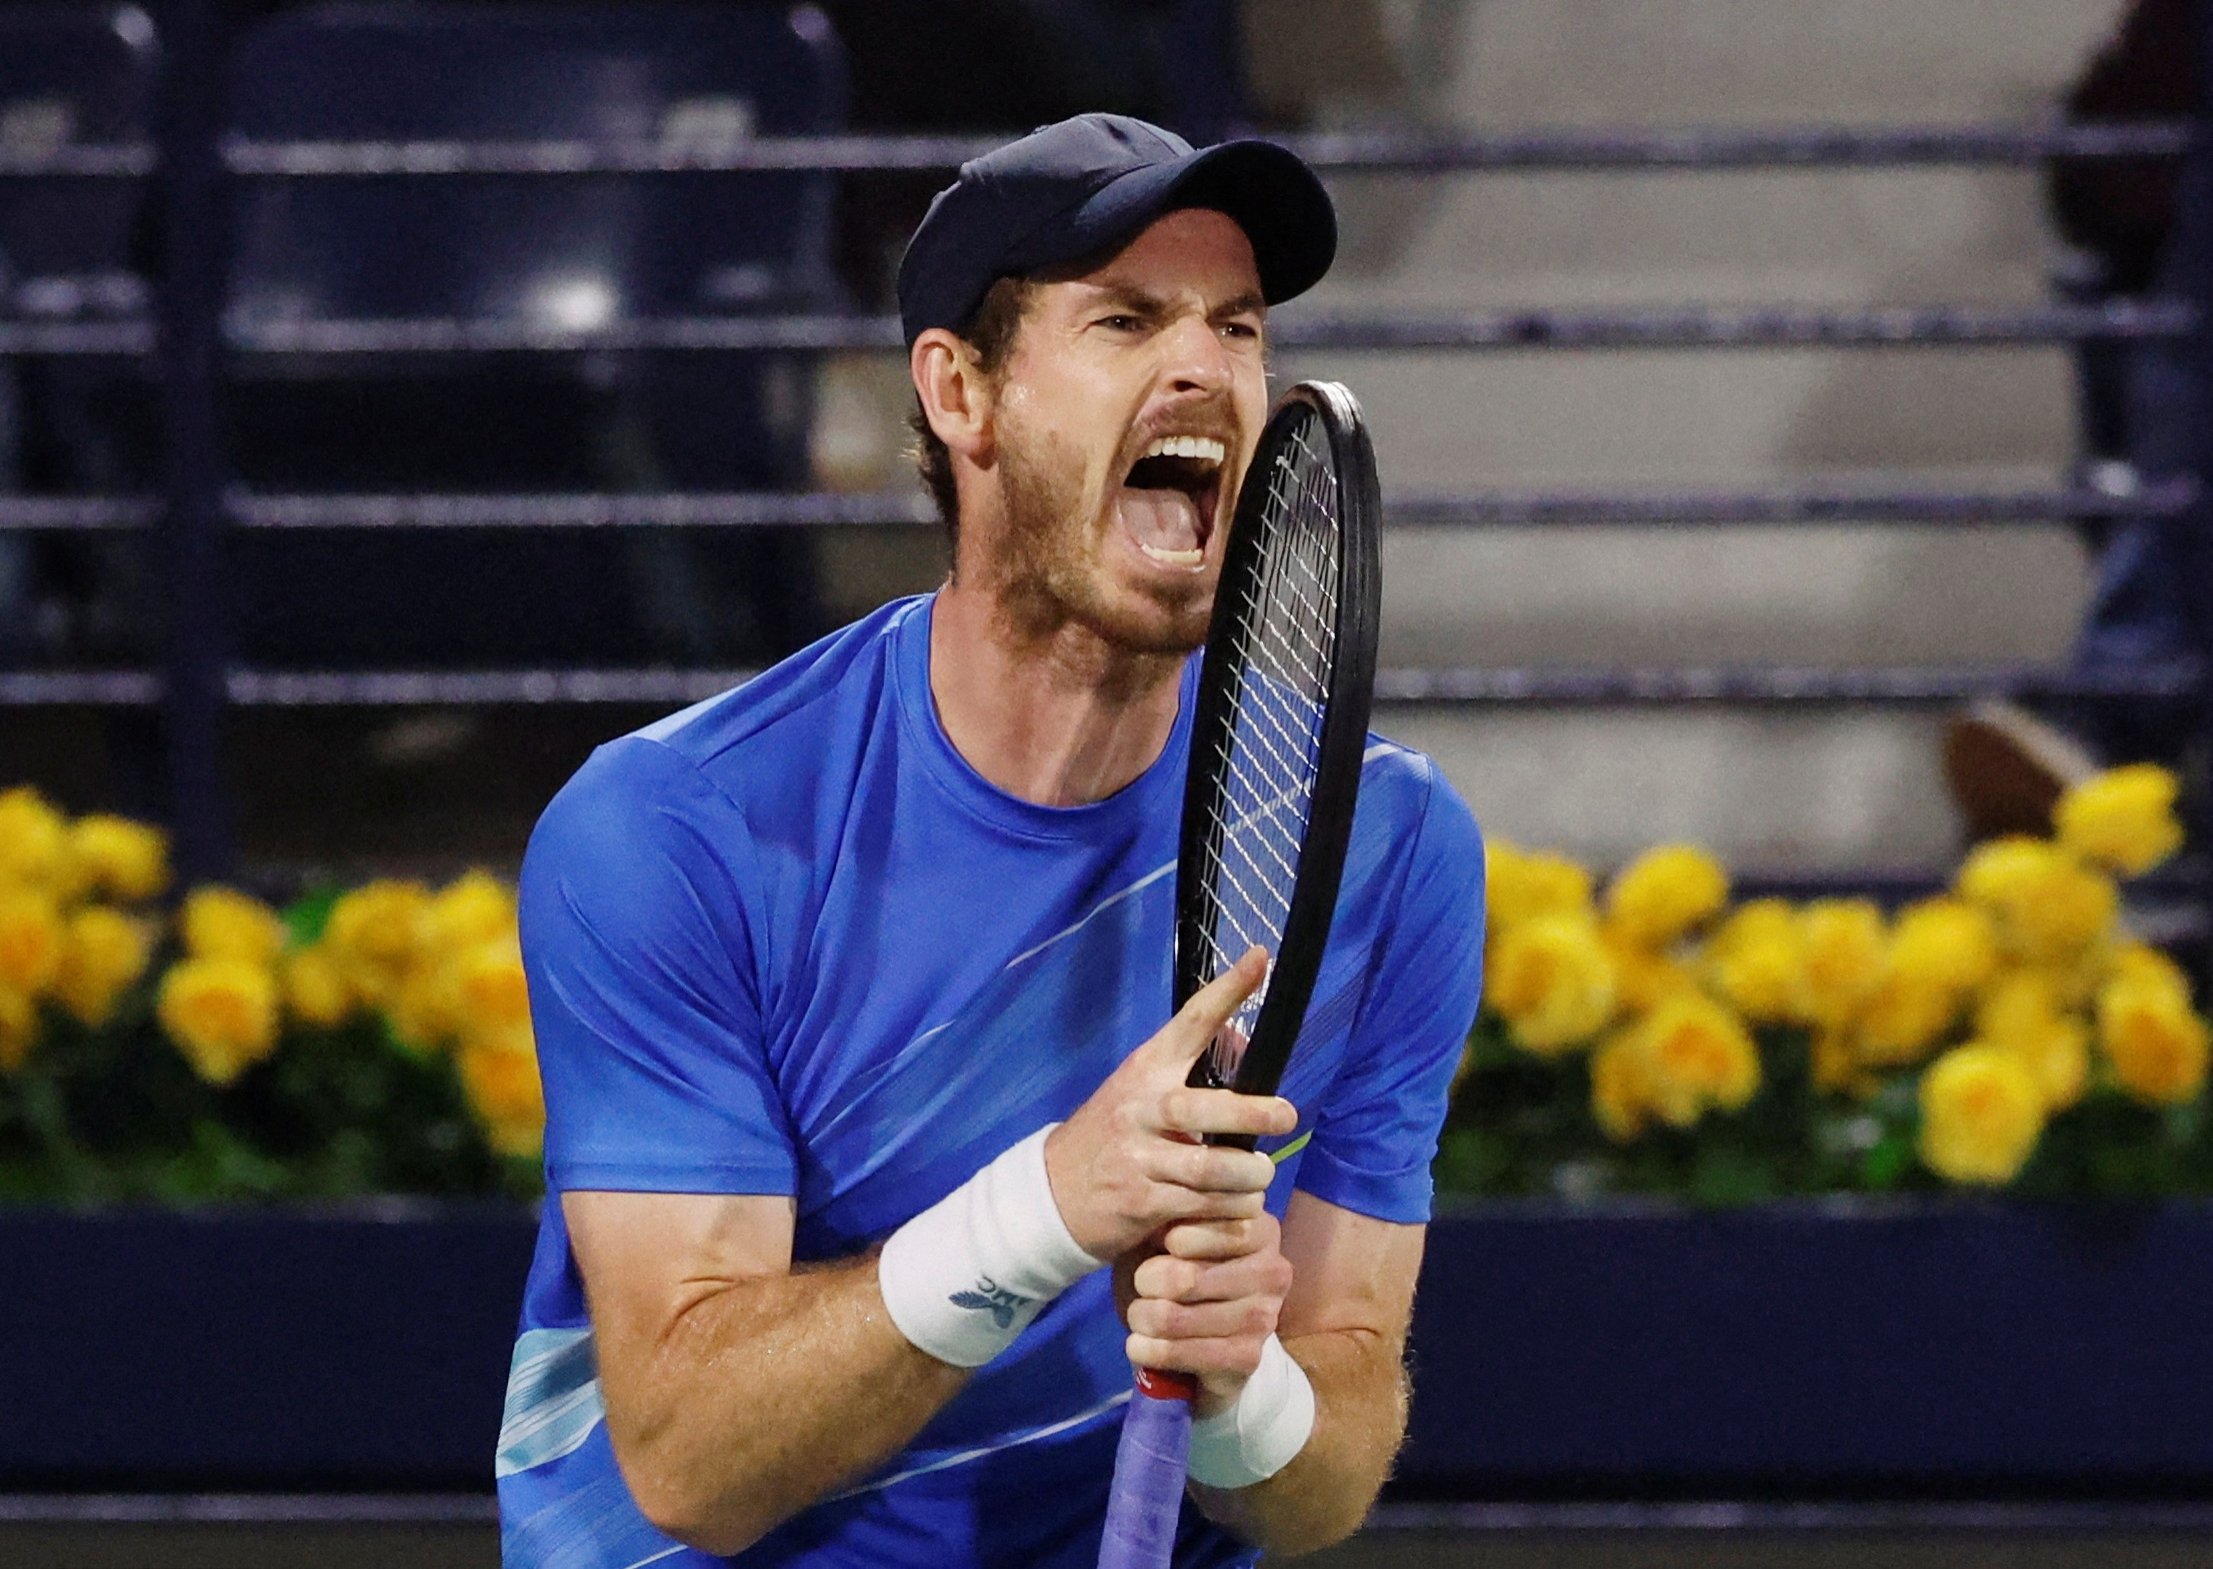 Andy Murray reacts during his Dubai Tennis Championships match against Christopher O'Connell, Dubai, UAE, Feb. 21, 2022. (Reuters Photo)